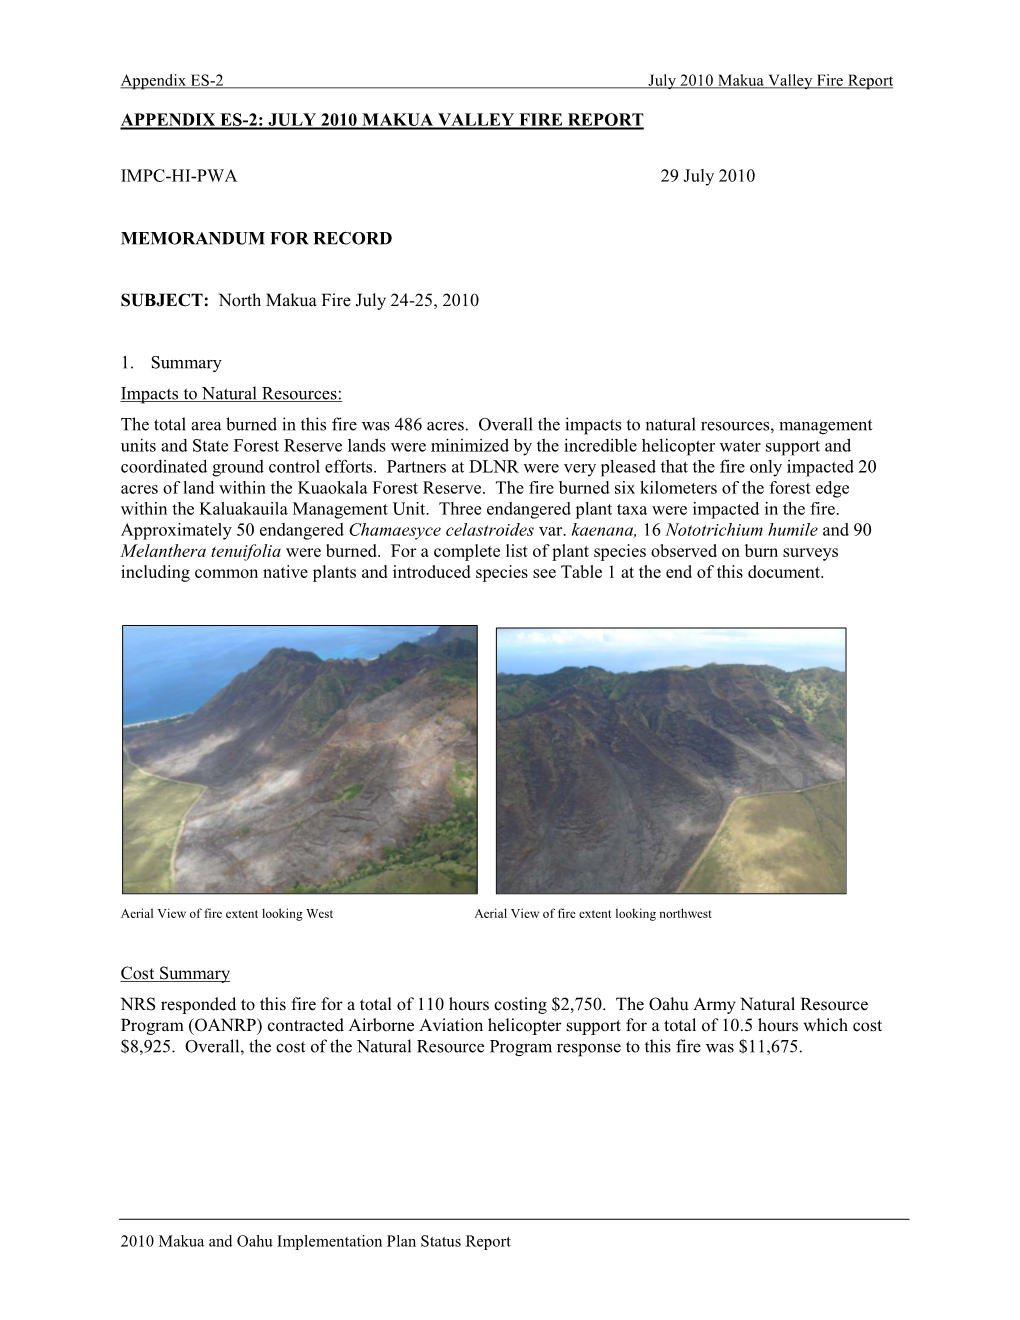 Appendices. 2010 Status Report for the Makua and Oahu